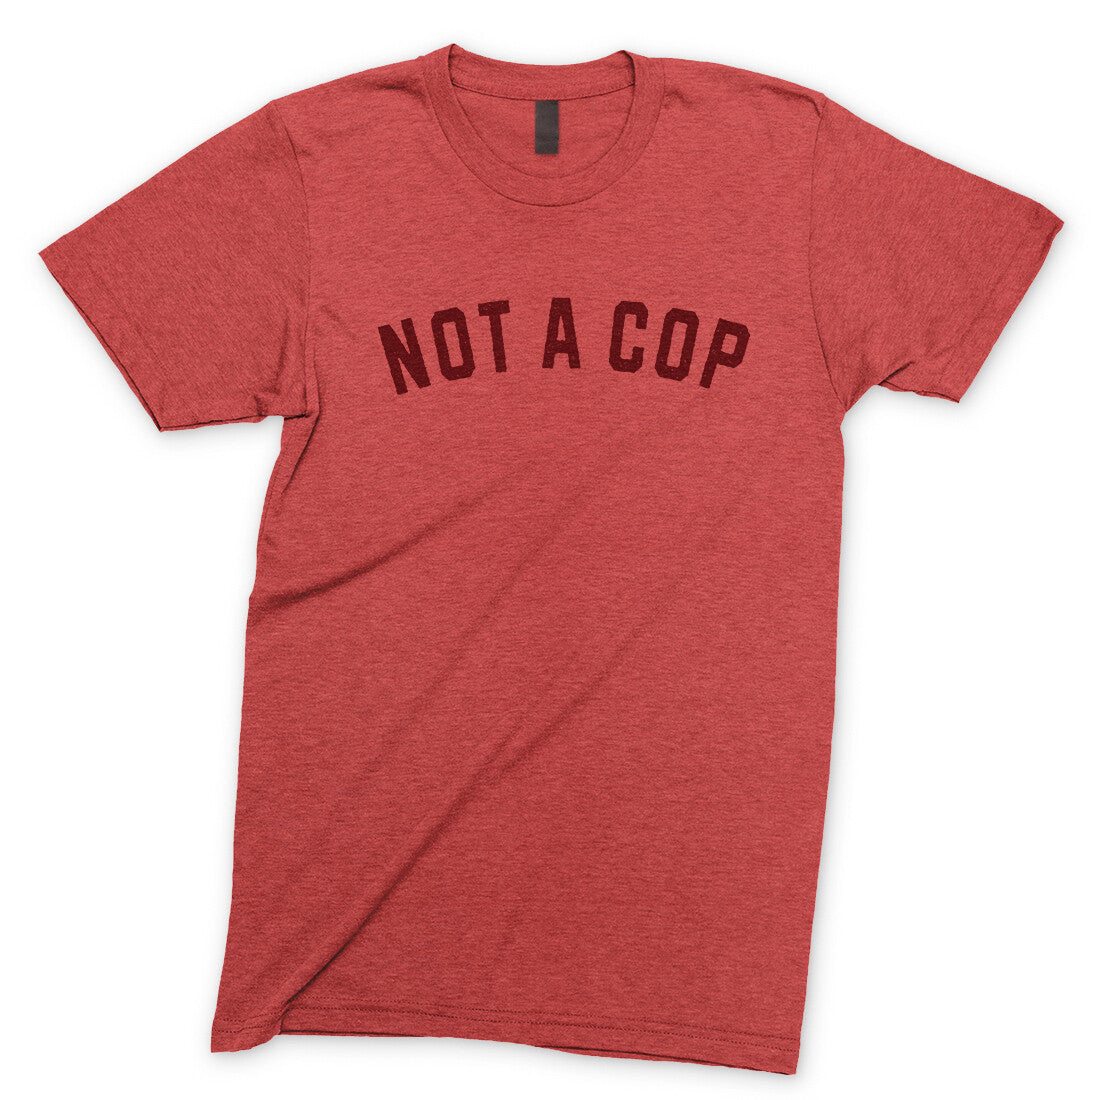 Not a Cop in Heather Red Color